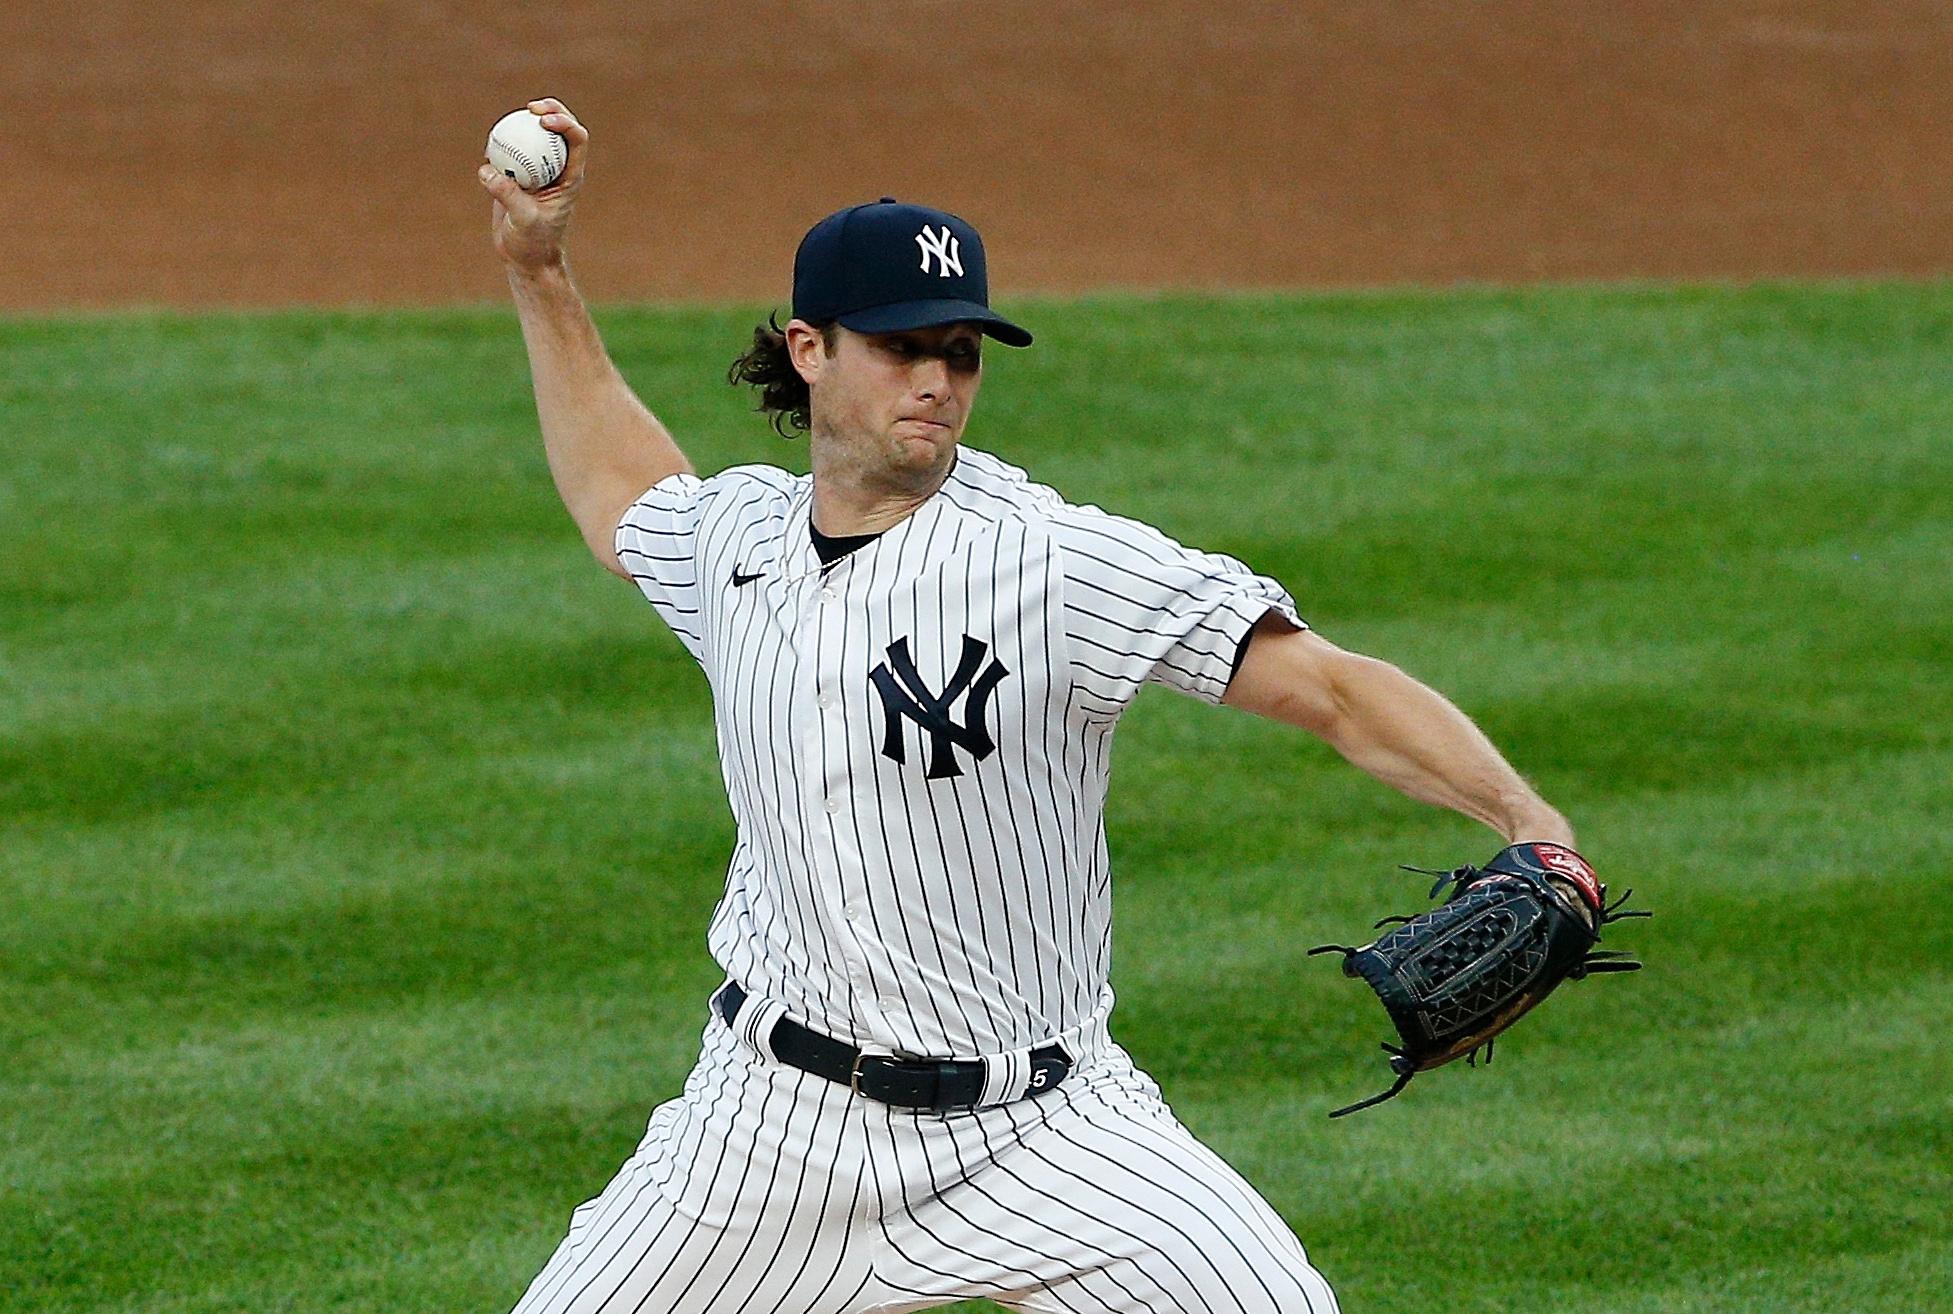 New York Yankees starting pitcher Gerrit Cole (45) pitches against the Boston Red Sox during the second inning at Yankee Stadium. / Andy Marlin - USA TODAY Sports